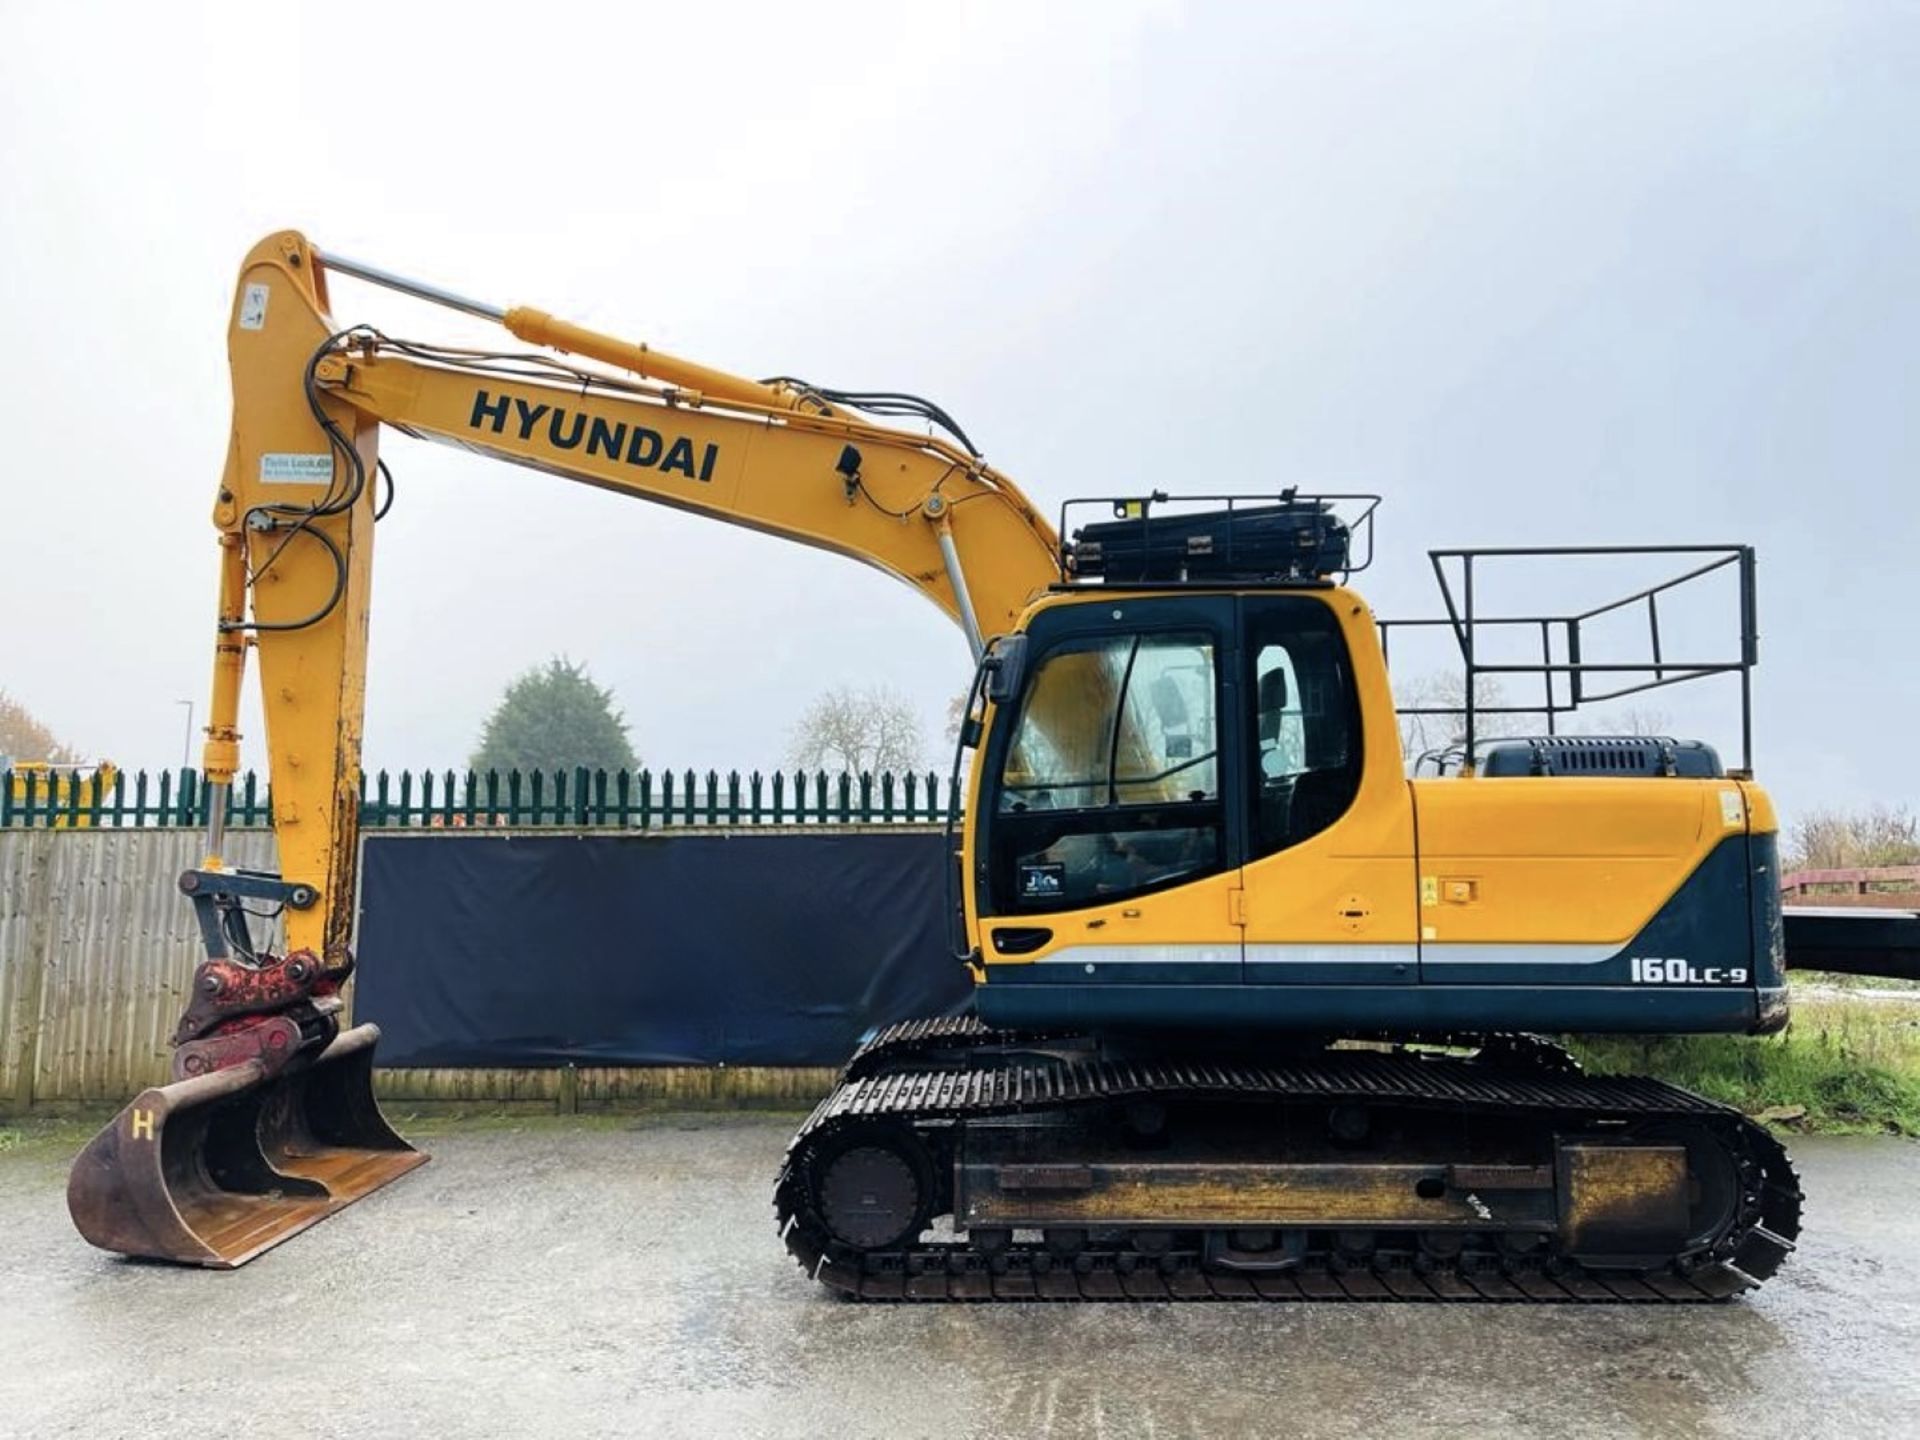 2013, HYUNDAI R160 LC-9 EXCAVATORHYUNDAI R160 LC-9 EXCAVATOR - Image 2 of 16